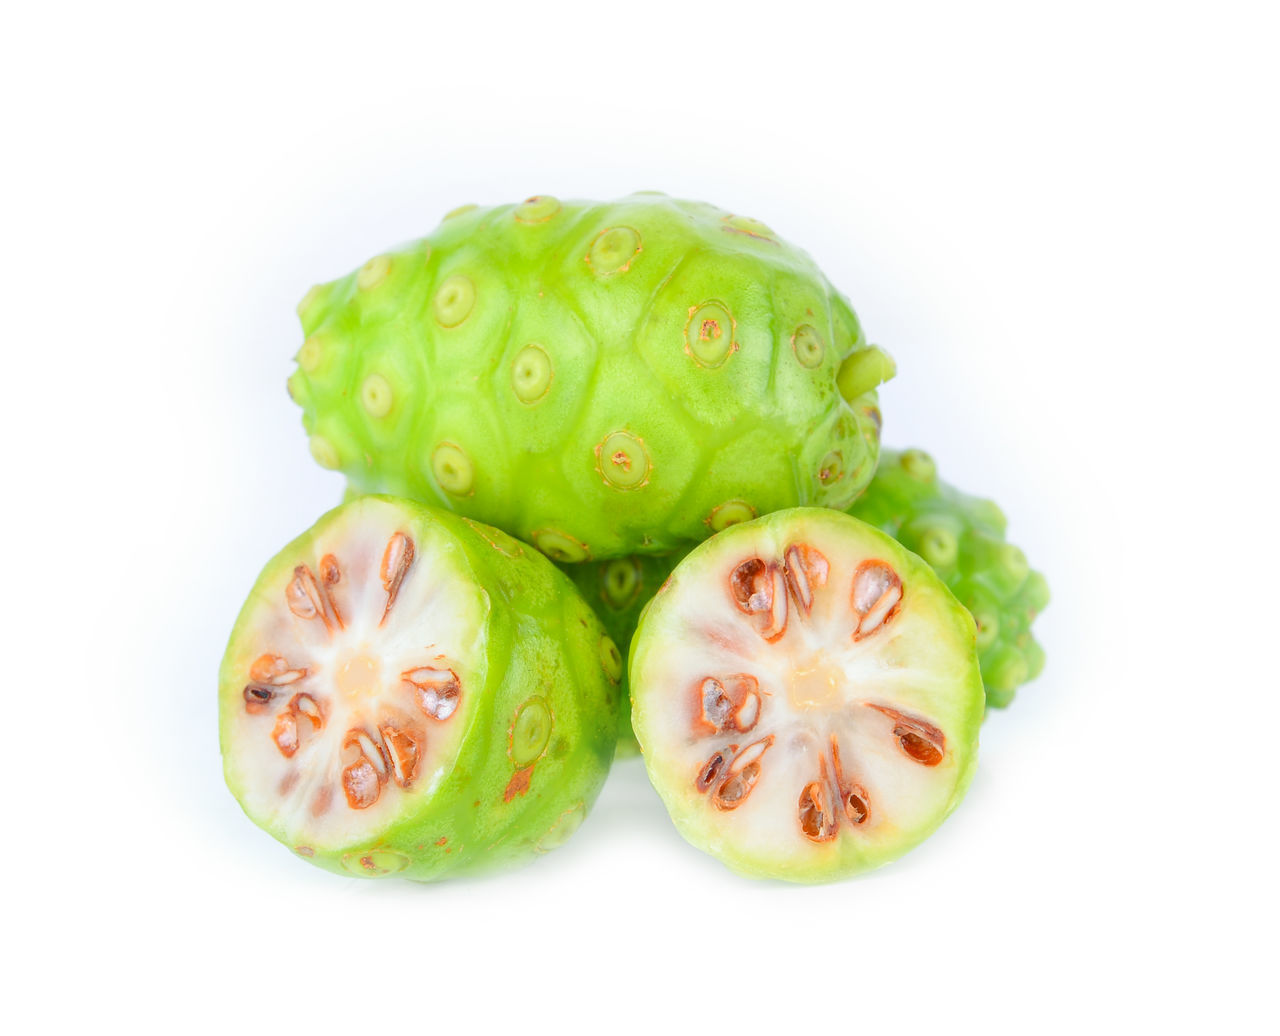 CLOSE-UP OF FRUITS IN WHITE BACKGROUND